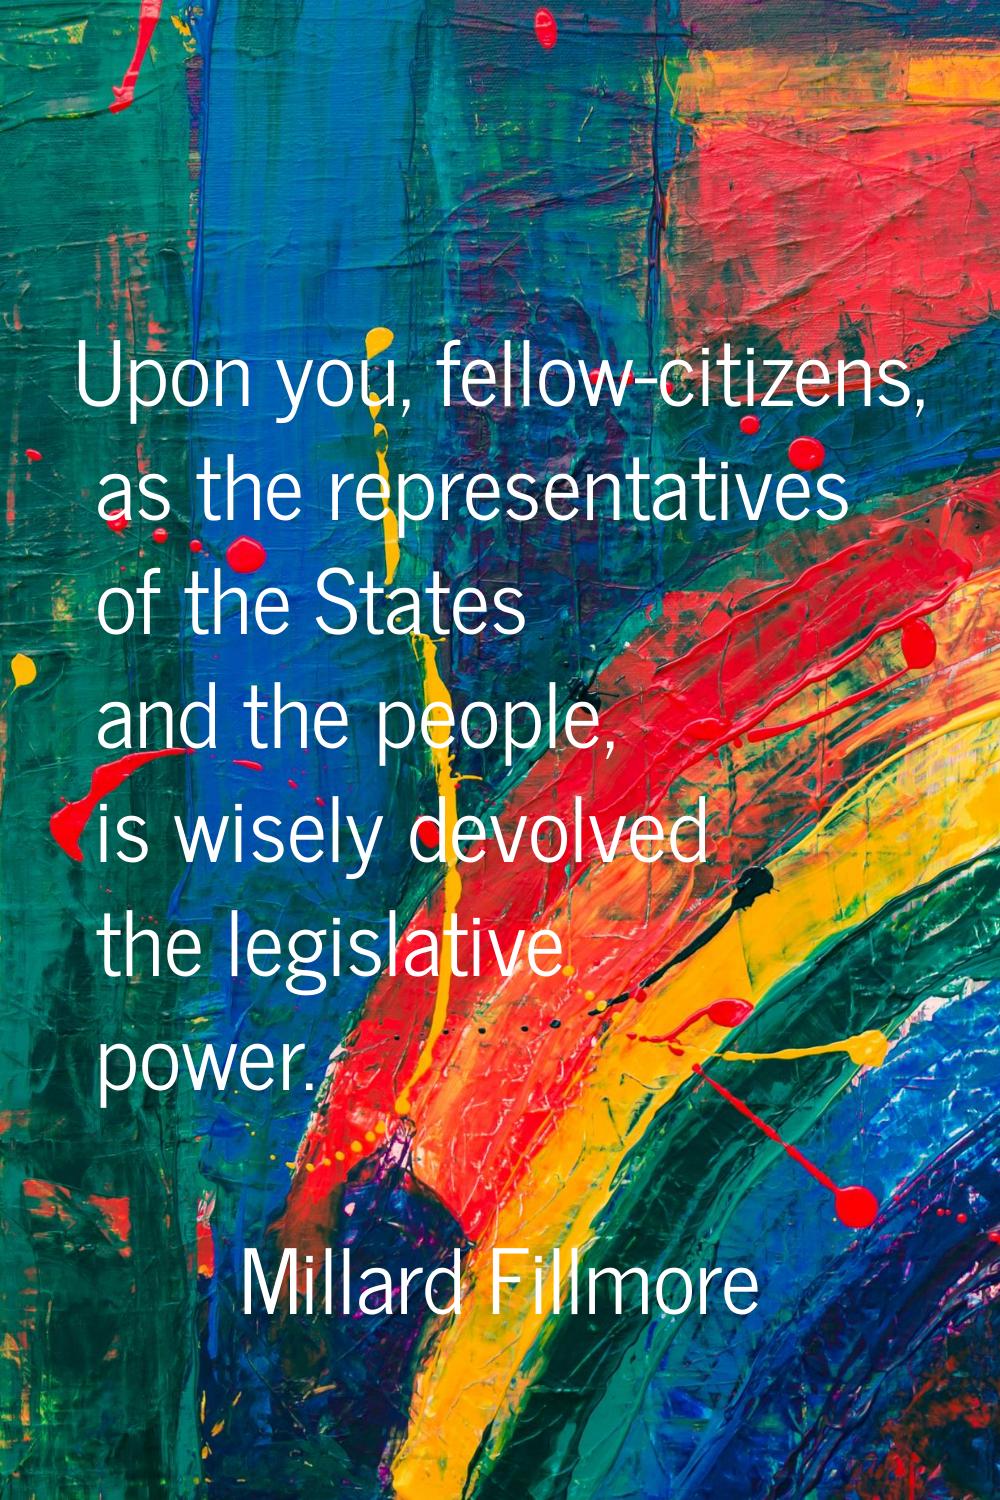 Upon you, fellow-citizens, as the representatives of the States and the people, is wisely devolved 